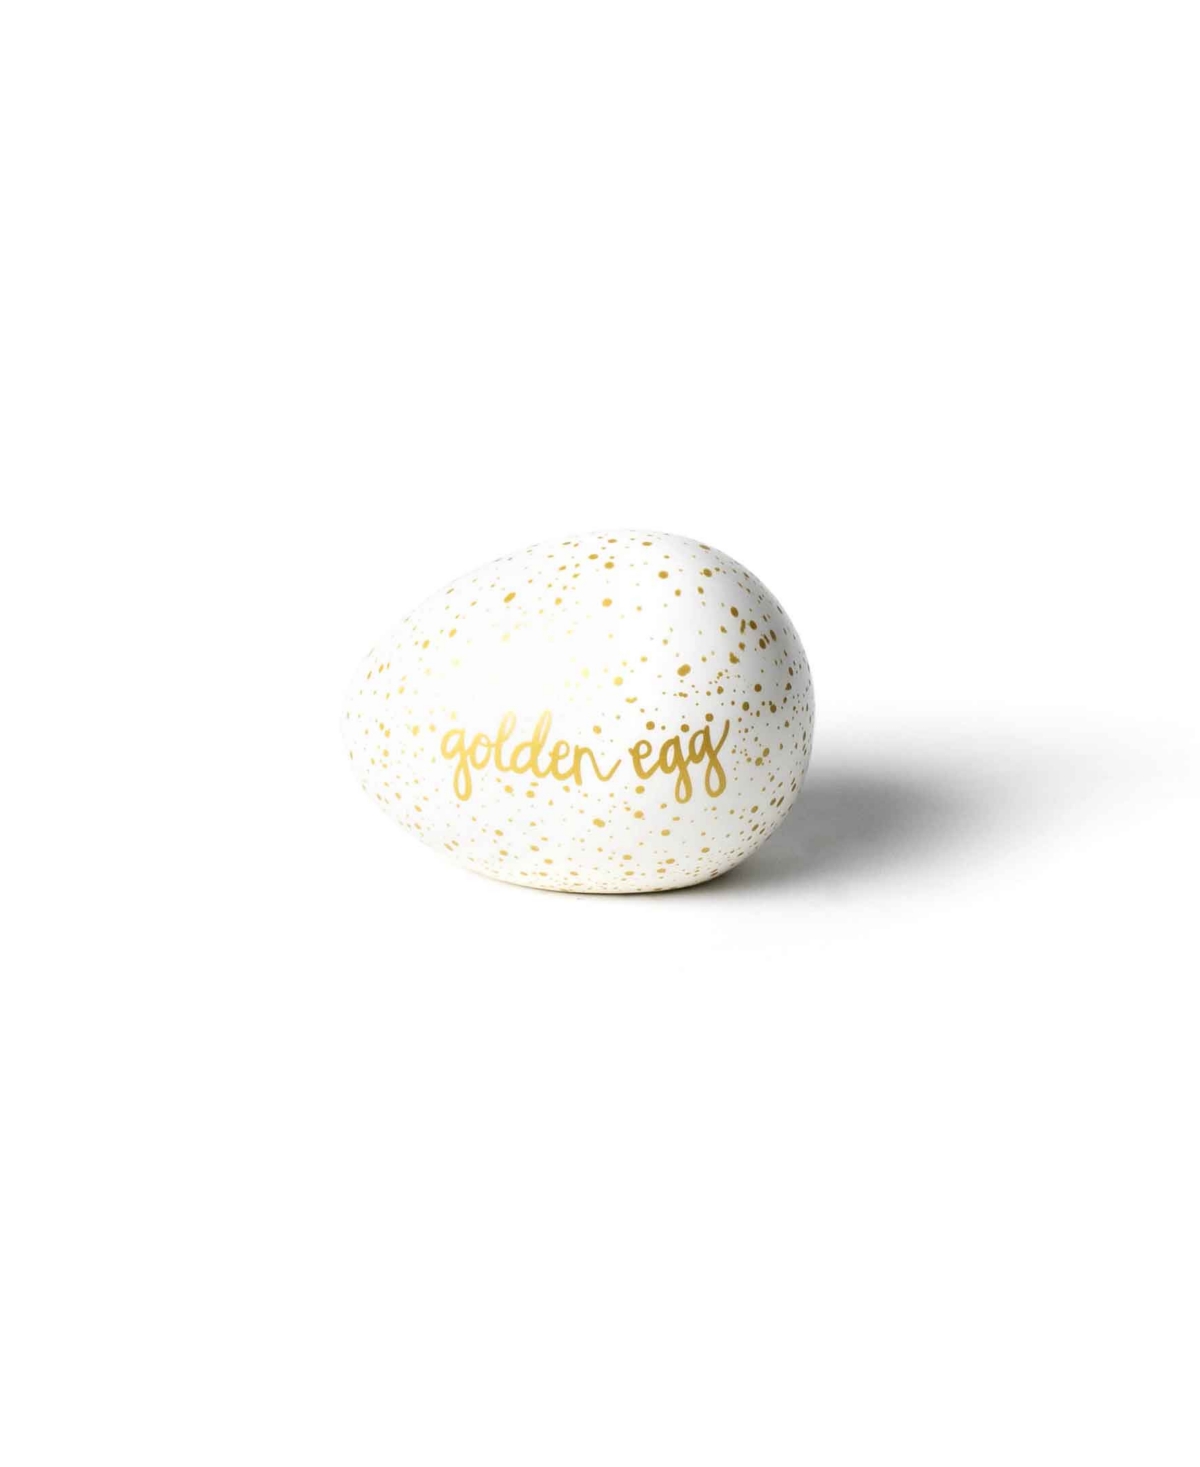 Coton Colors By Laura Johnson Speckled Golden Egg In White